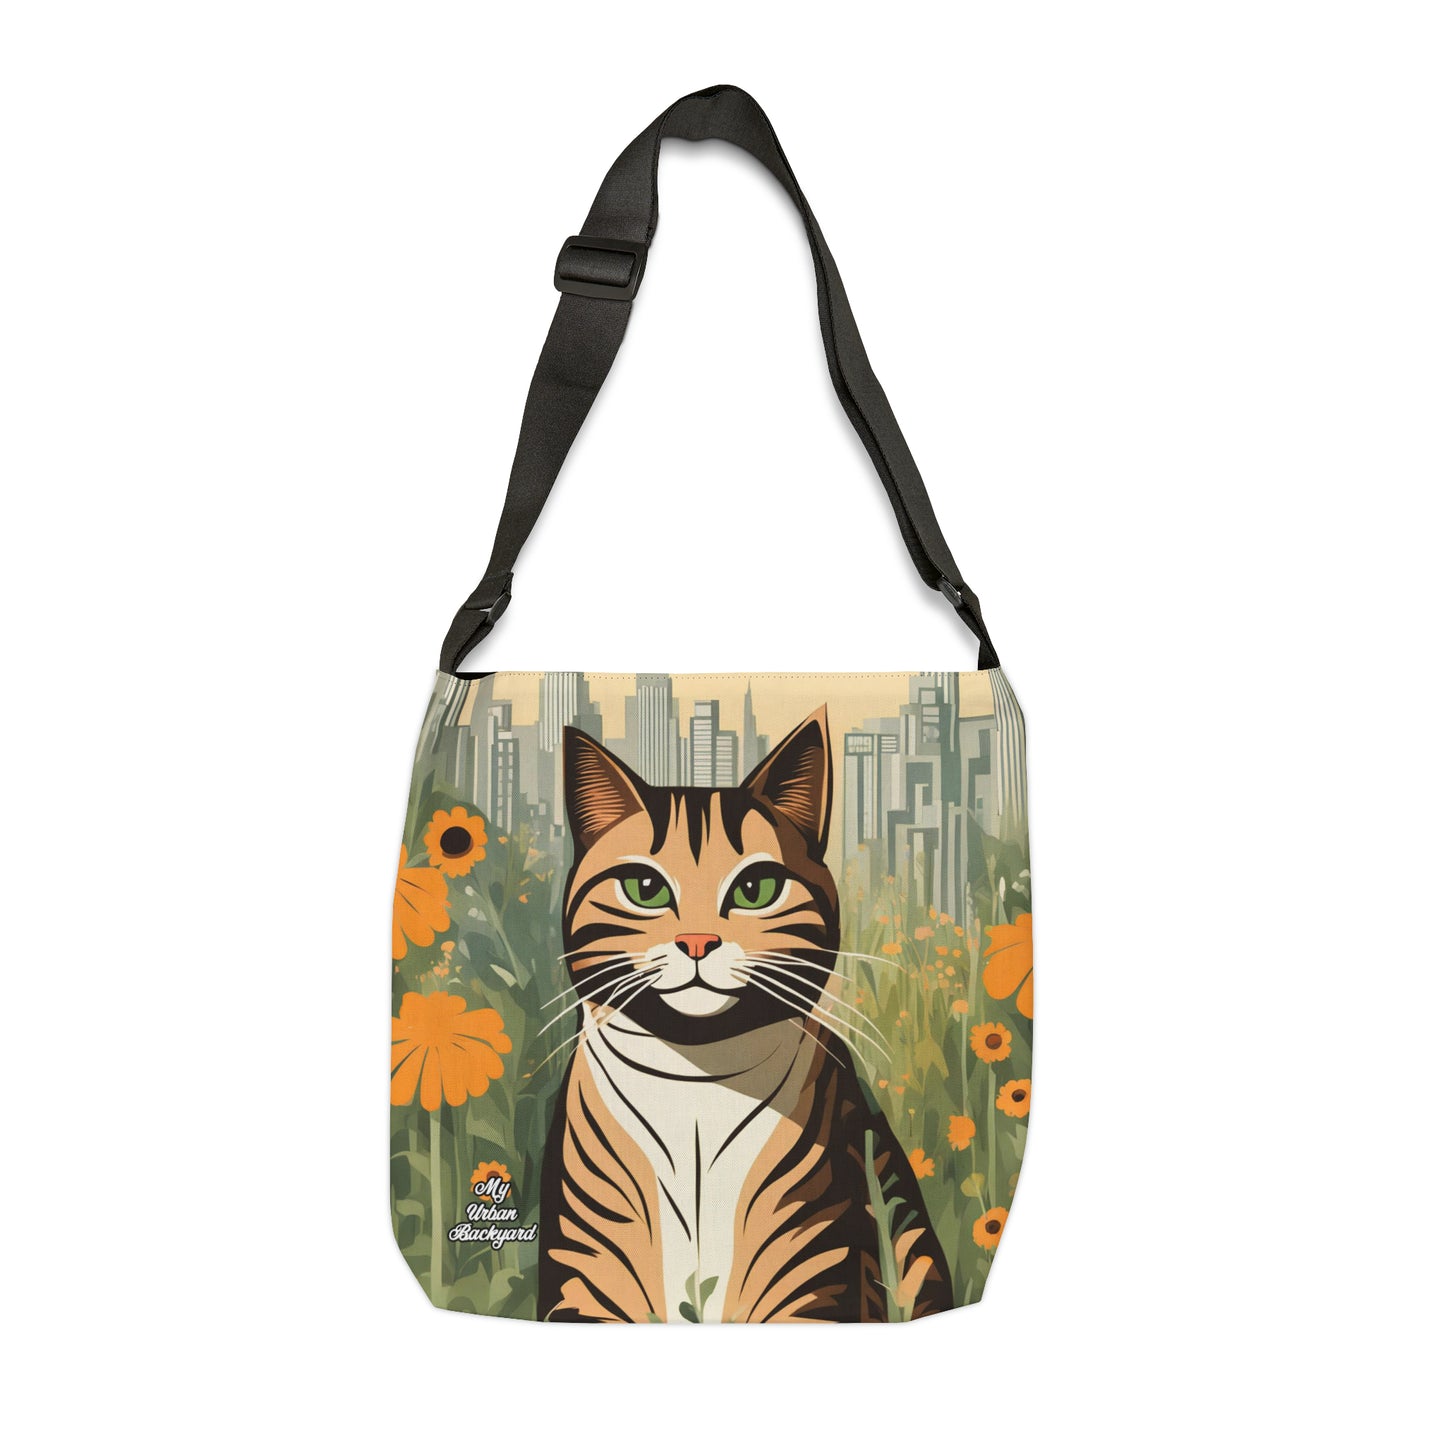 City Tabby, Tote Bag with Adjustable Strap - Trendy and Versatile